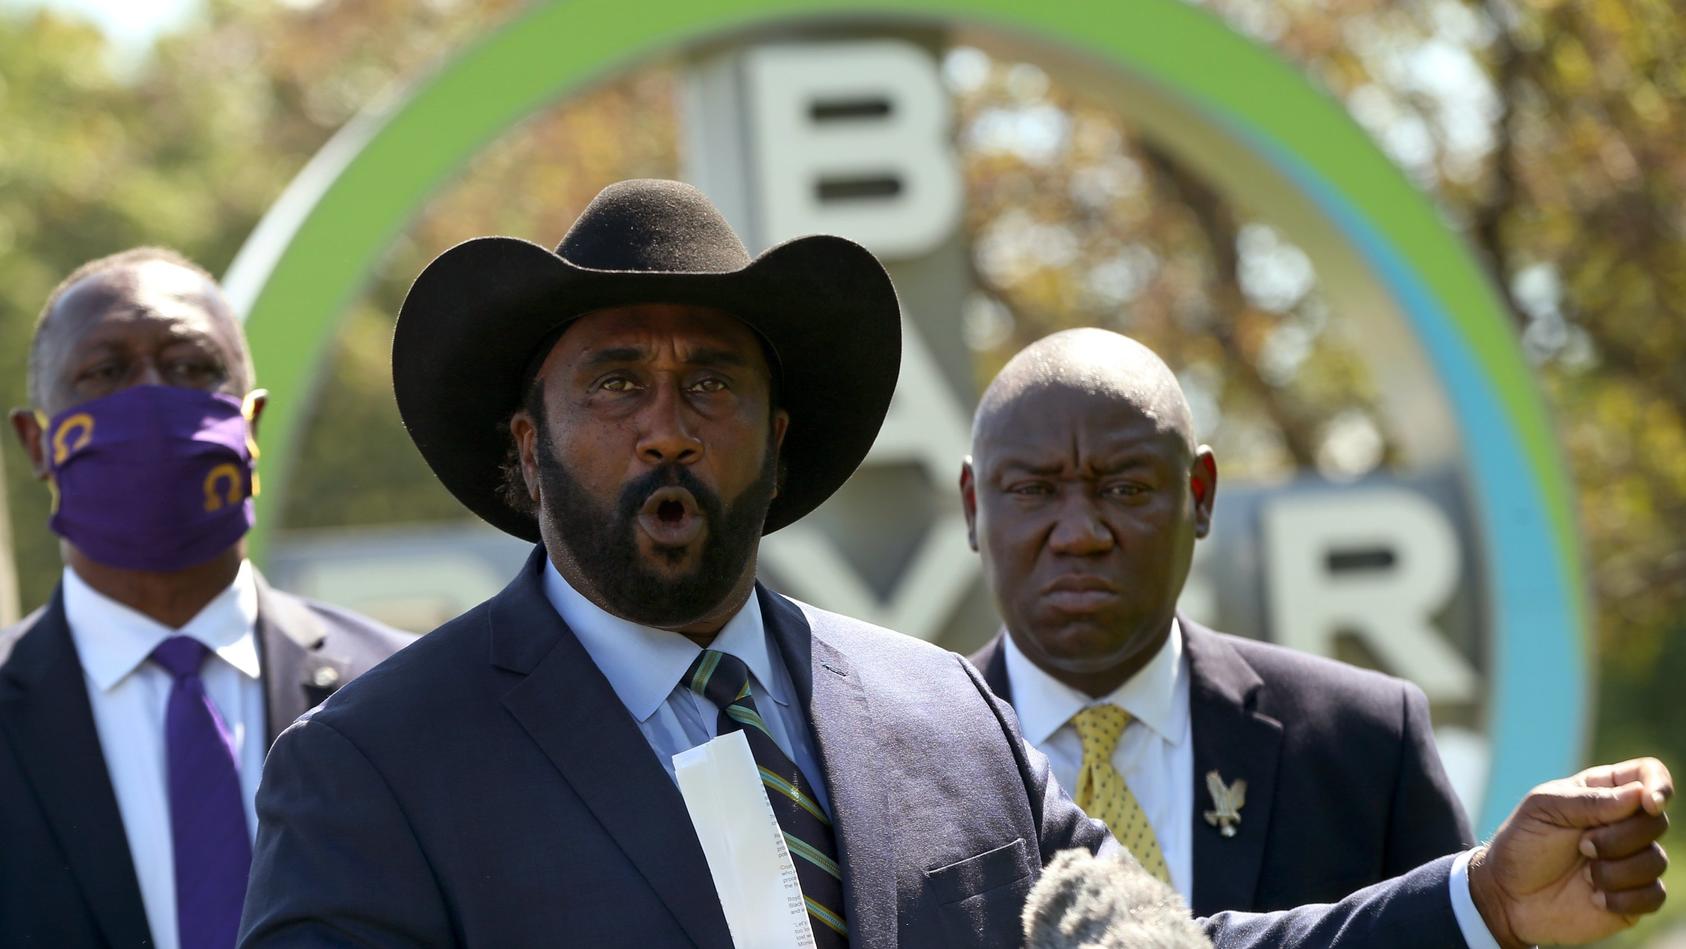 John Wesley Boyd, Jr., center, founder and president of the National Black Farmers' Association, speaks at a press conference on Wednesday, Aug. 26, 2020,in Creve Coeur, Mo., after Attorney Ben Crump, right, announced federal action to block Bayer-Mo